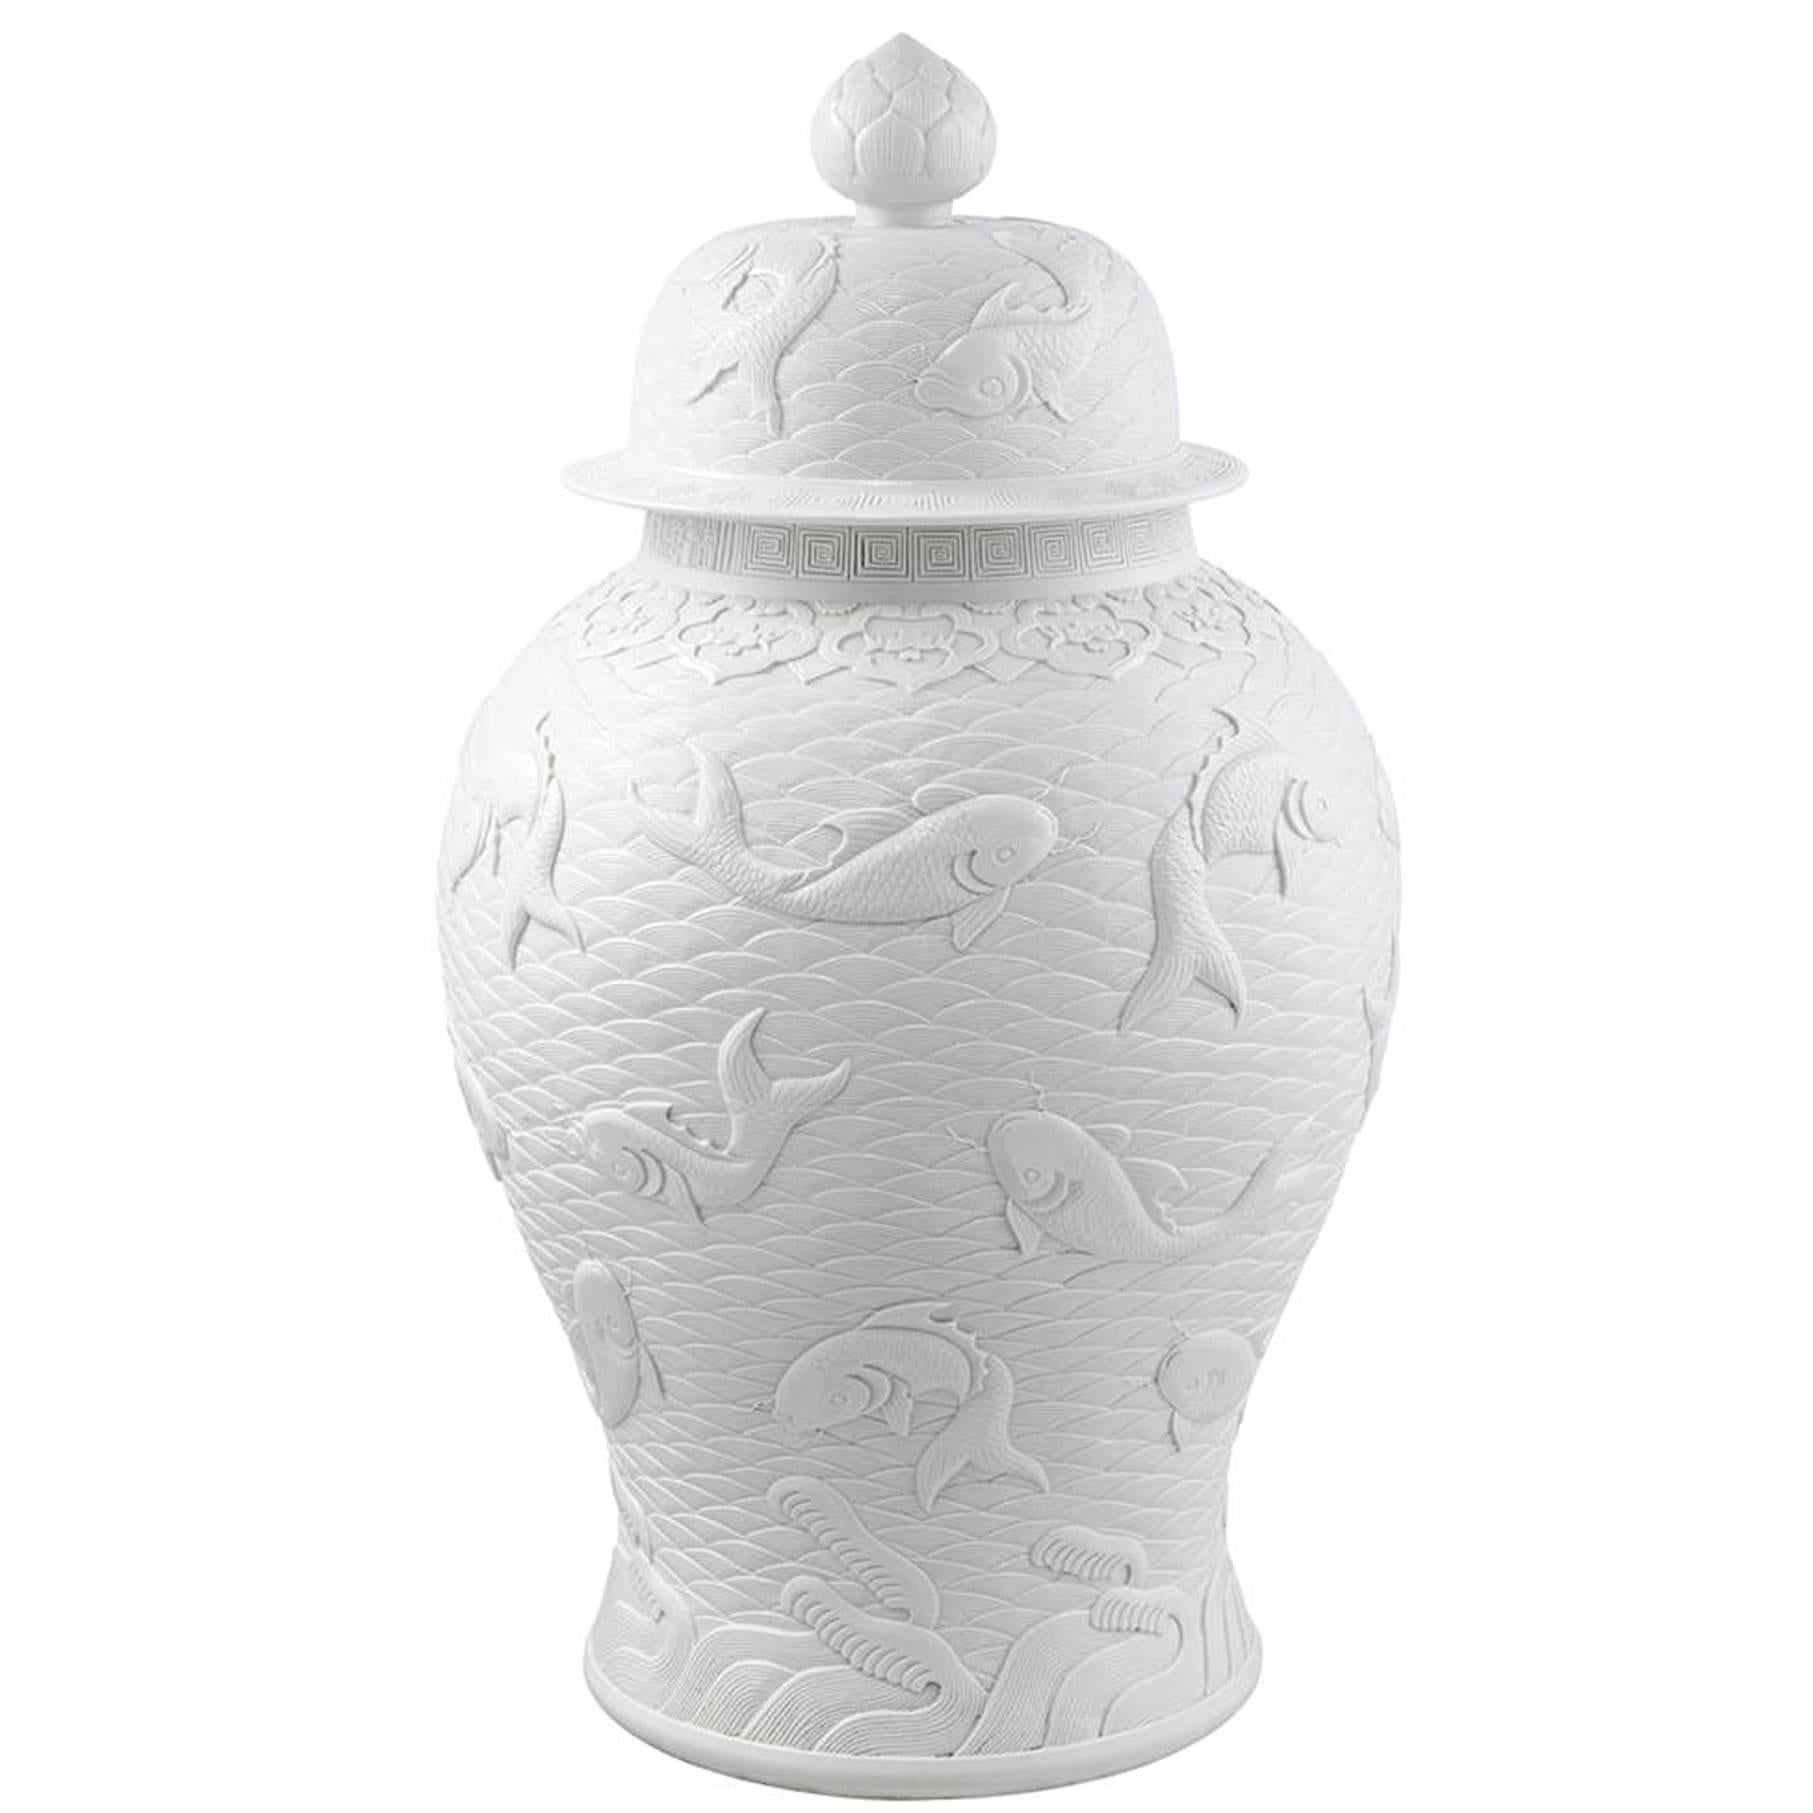 Karps Vase in White Relief Ceramic with Japanese Fishes